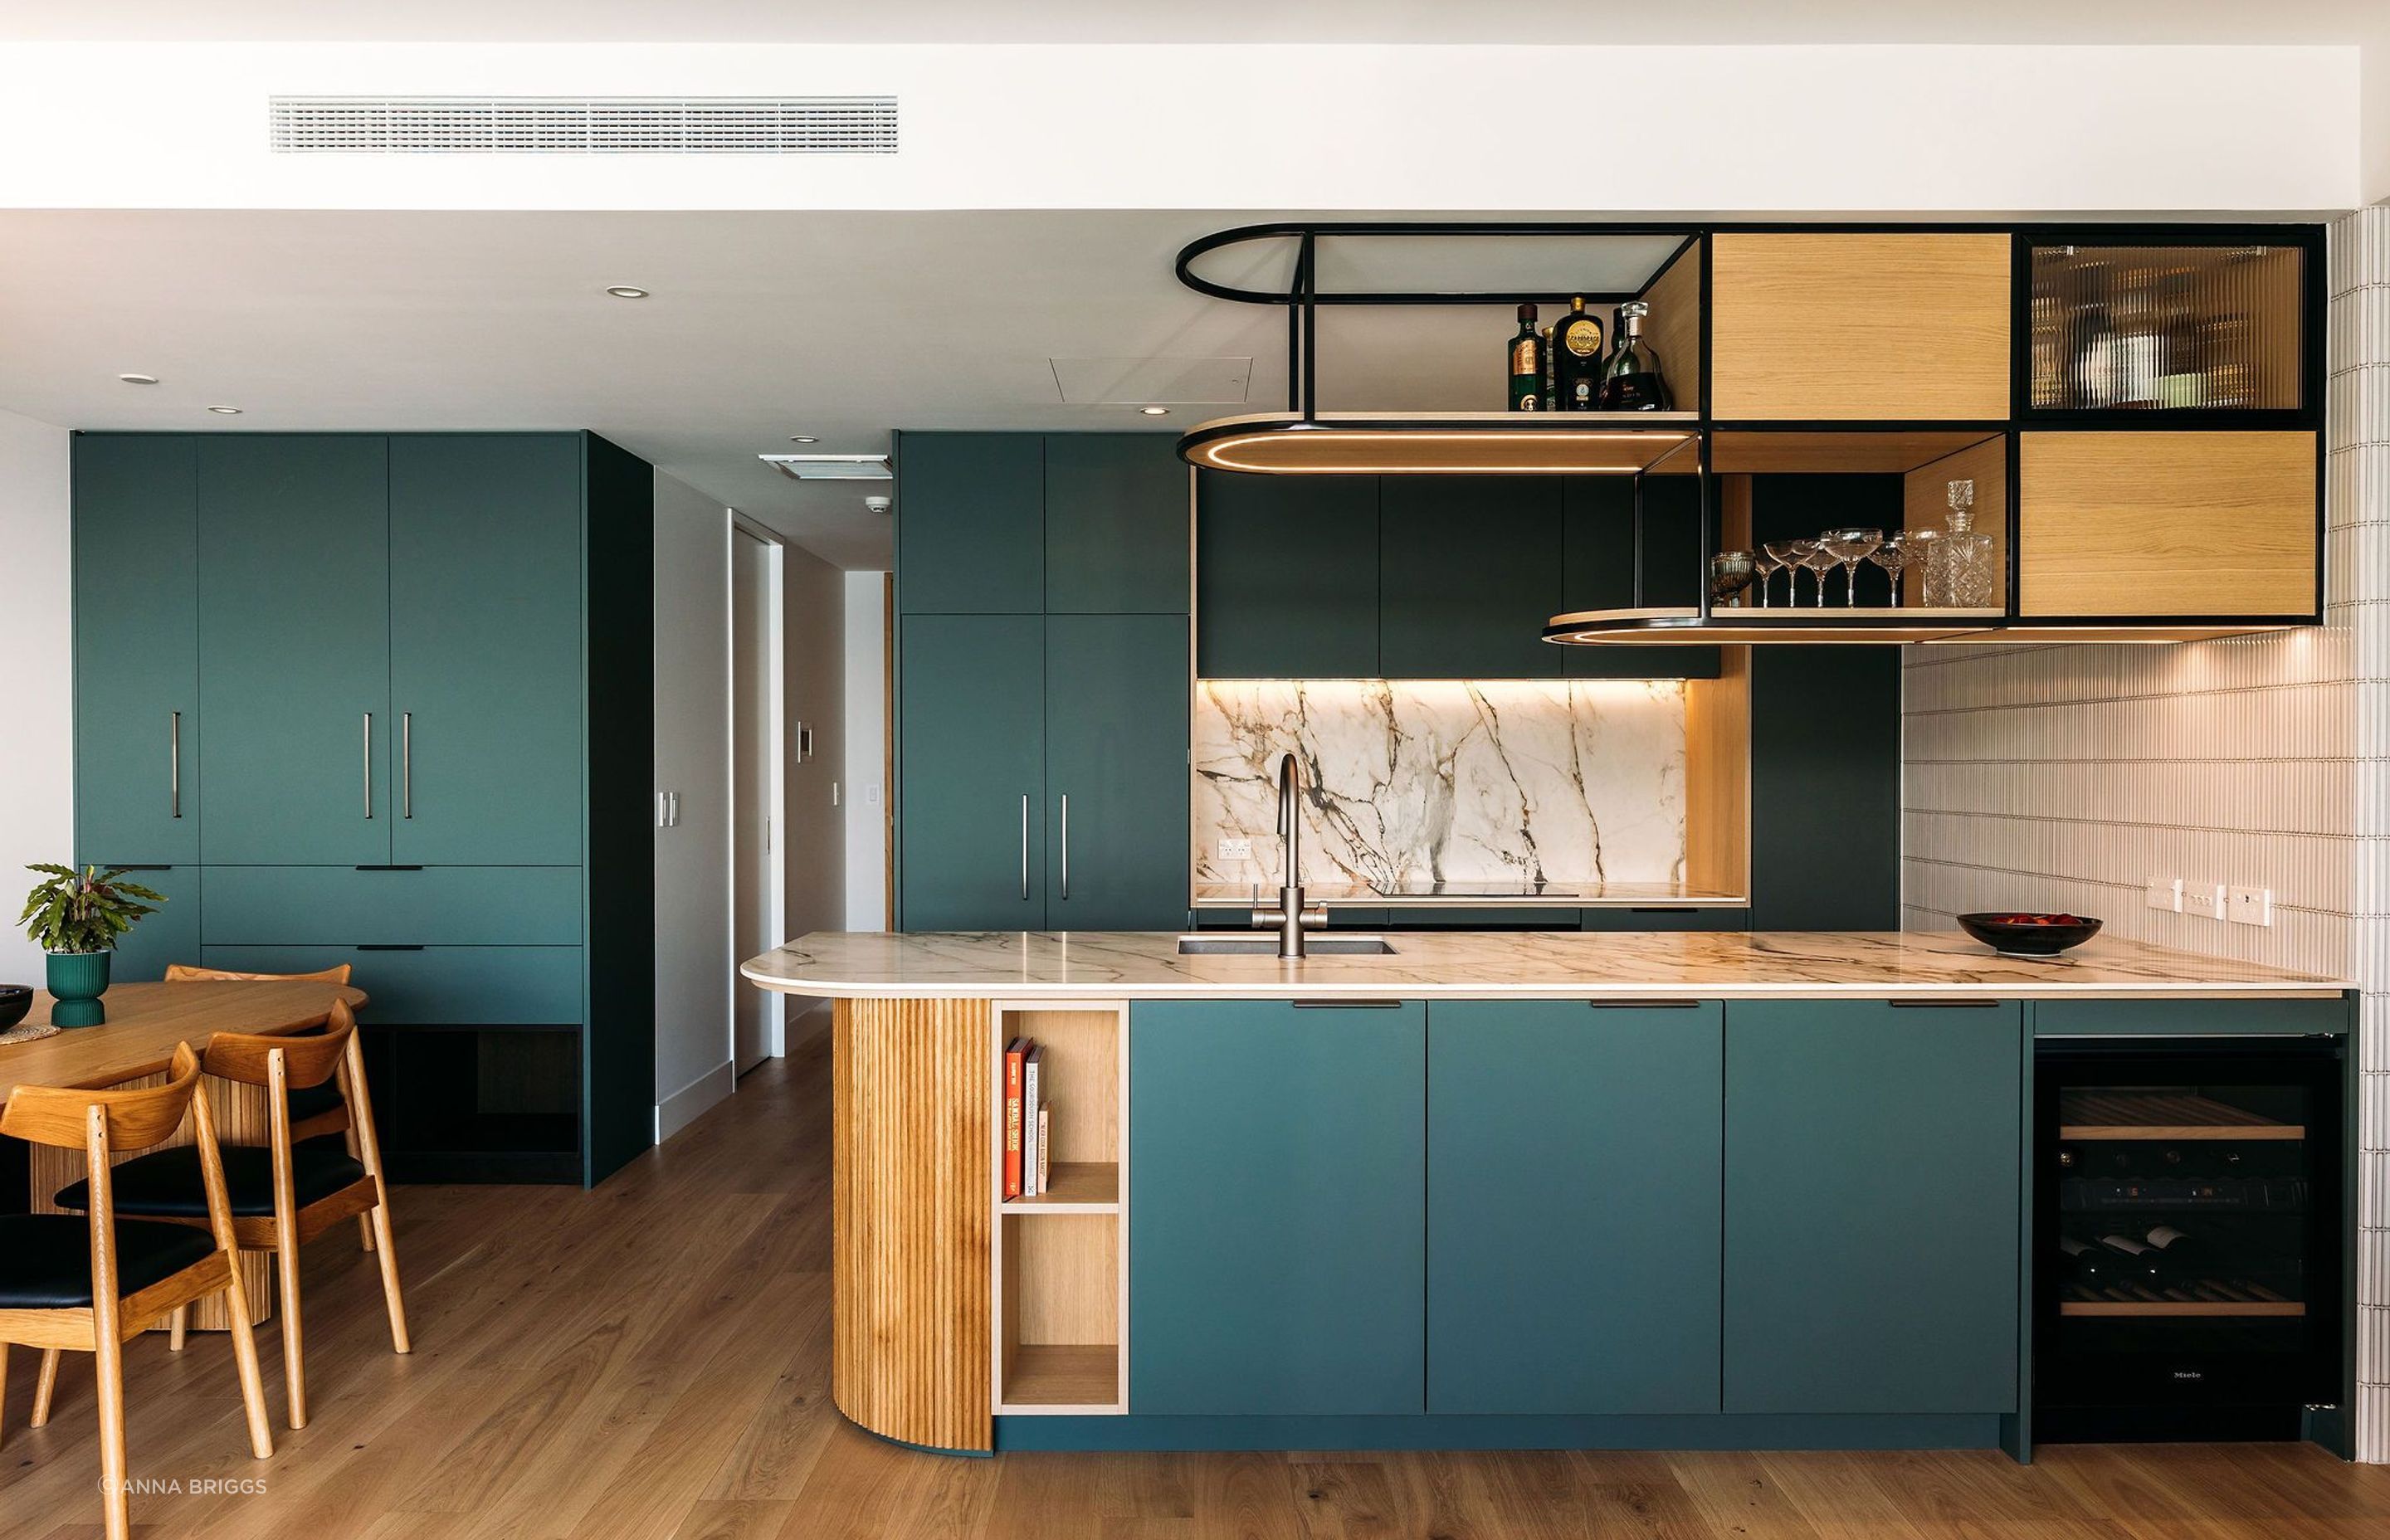 Reflecting the changing hues of the sea, this kitchen sits proud in the waterfront apartment.